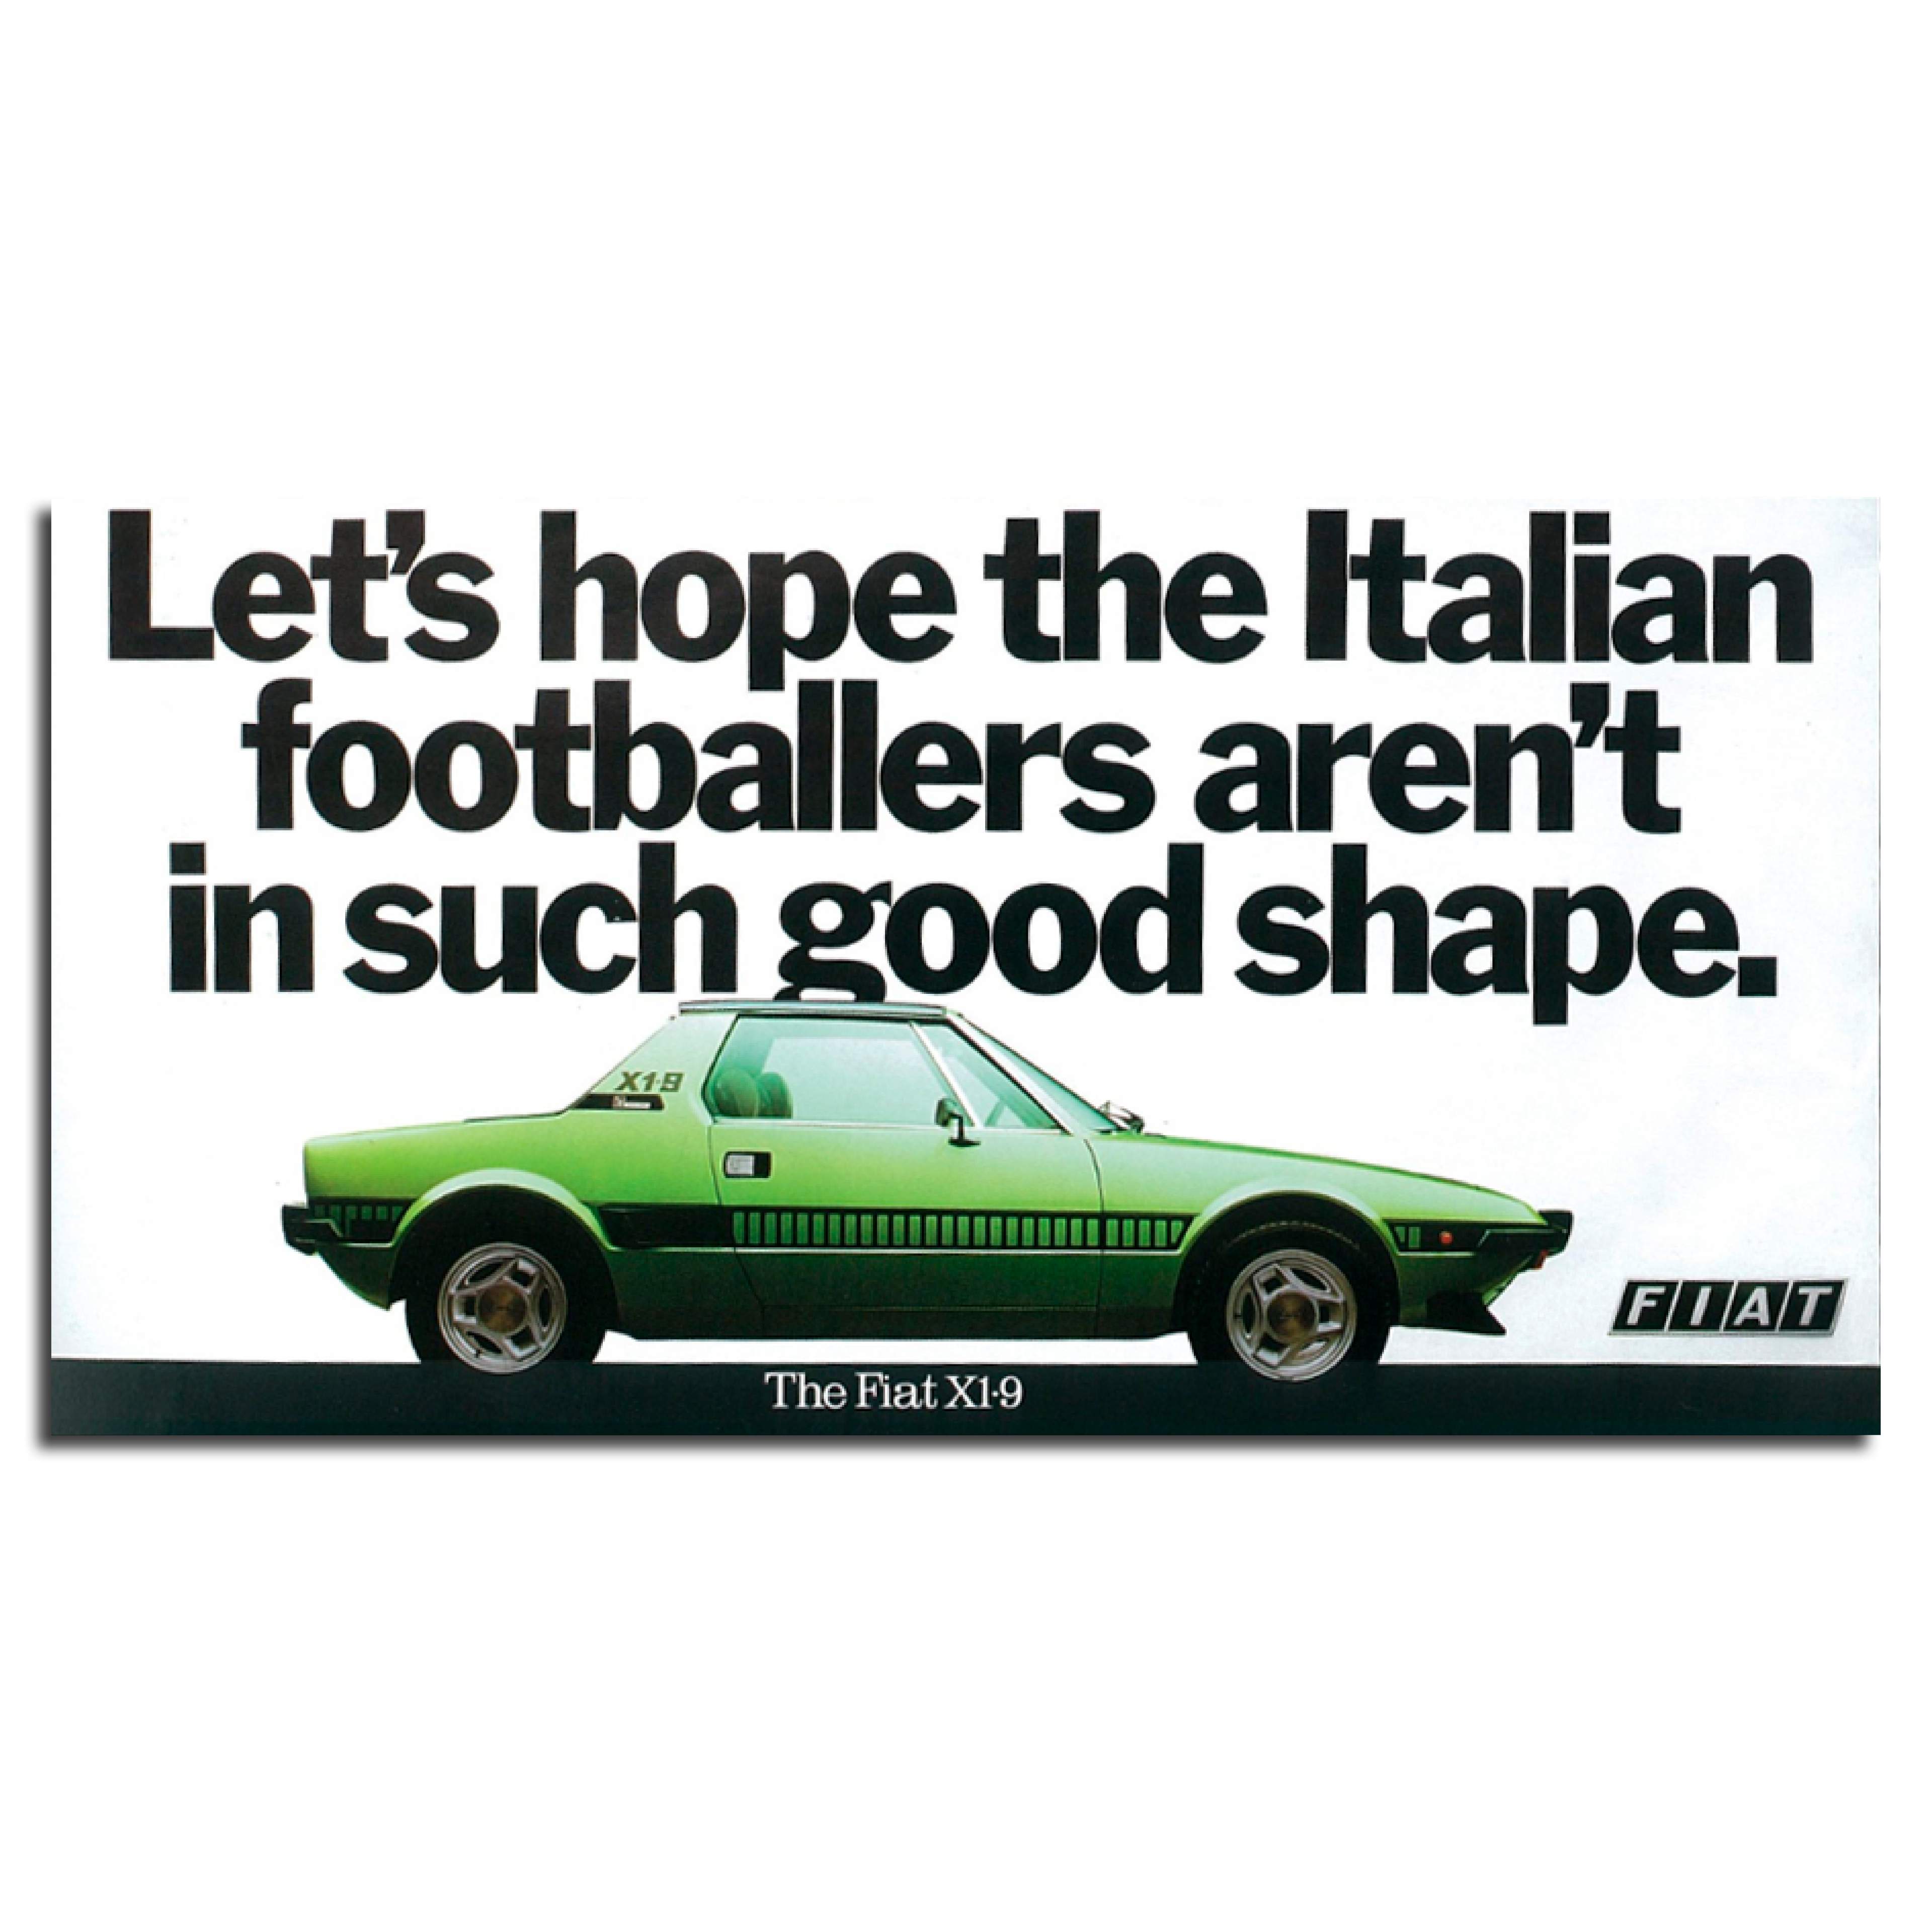 Award-winning poster for Fiat X1-9. Photo of the Fiat X1-9 with copy referring to the football world cup.